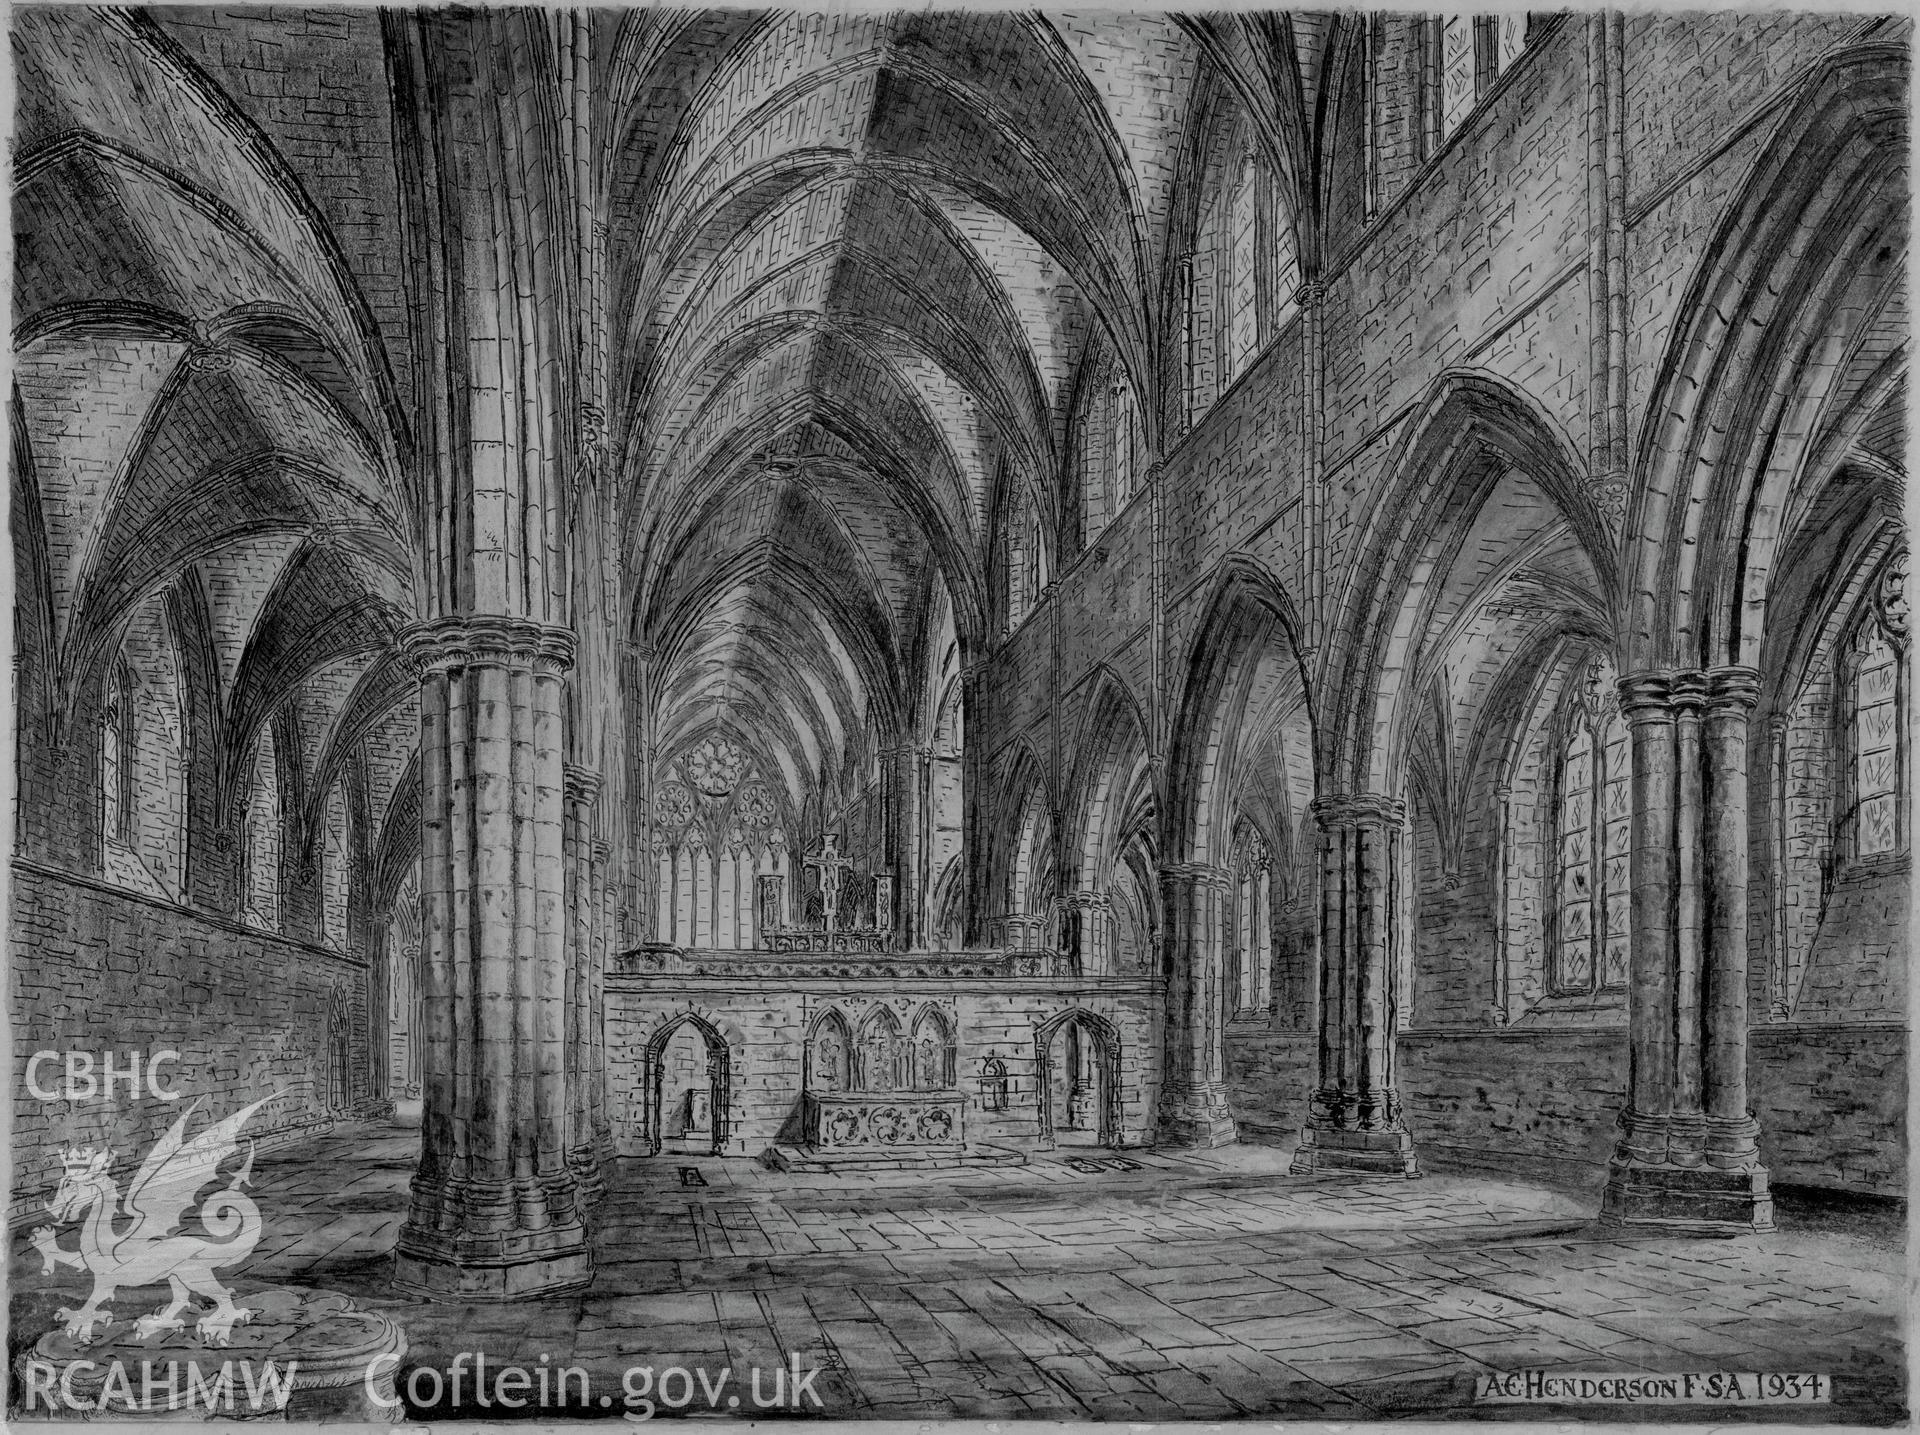 Conjectural reconstruction drawing of 'Tintern Abbey as Erected: Nave & North Aisle Looking East - Interior' produced by Arthur E. Henderson, 1934.